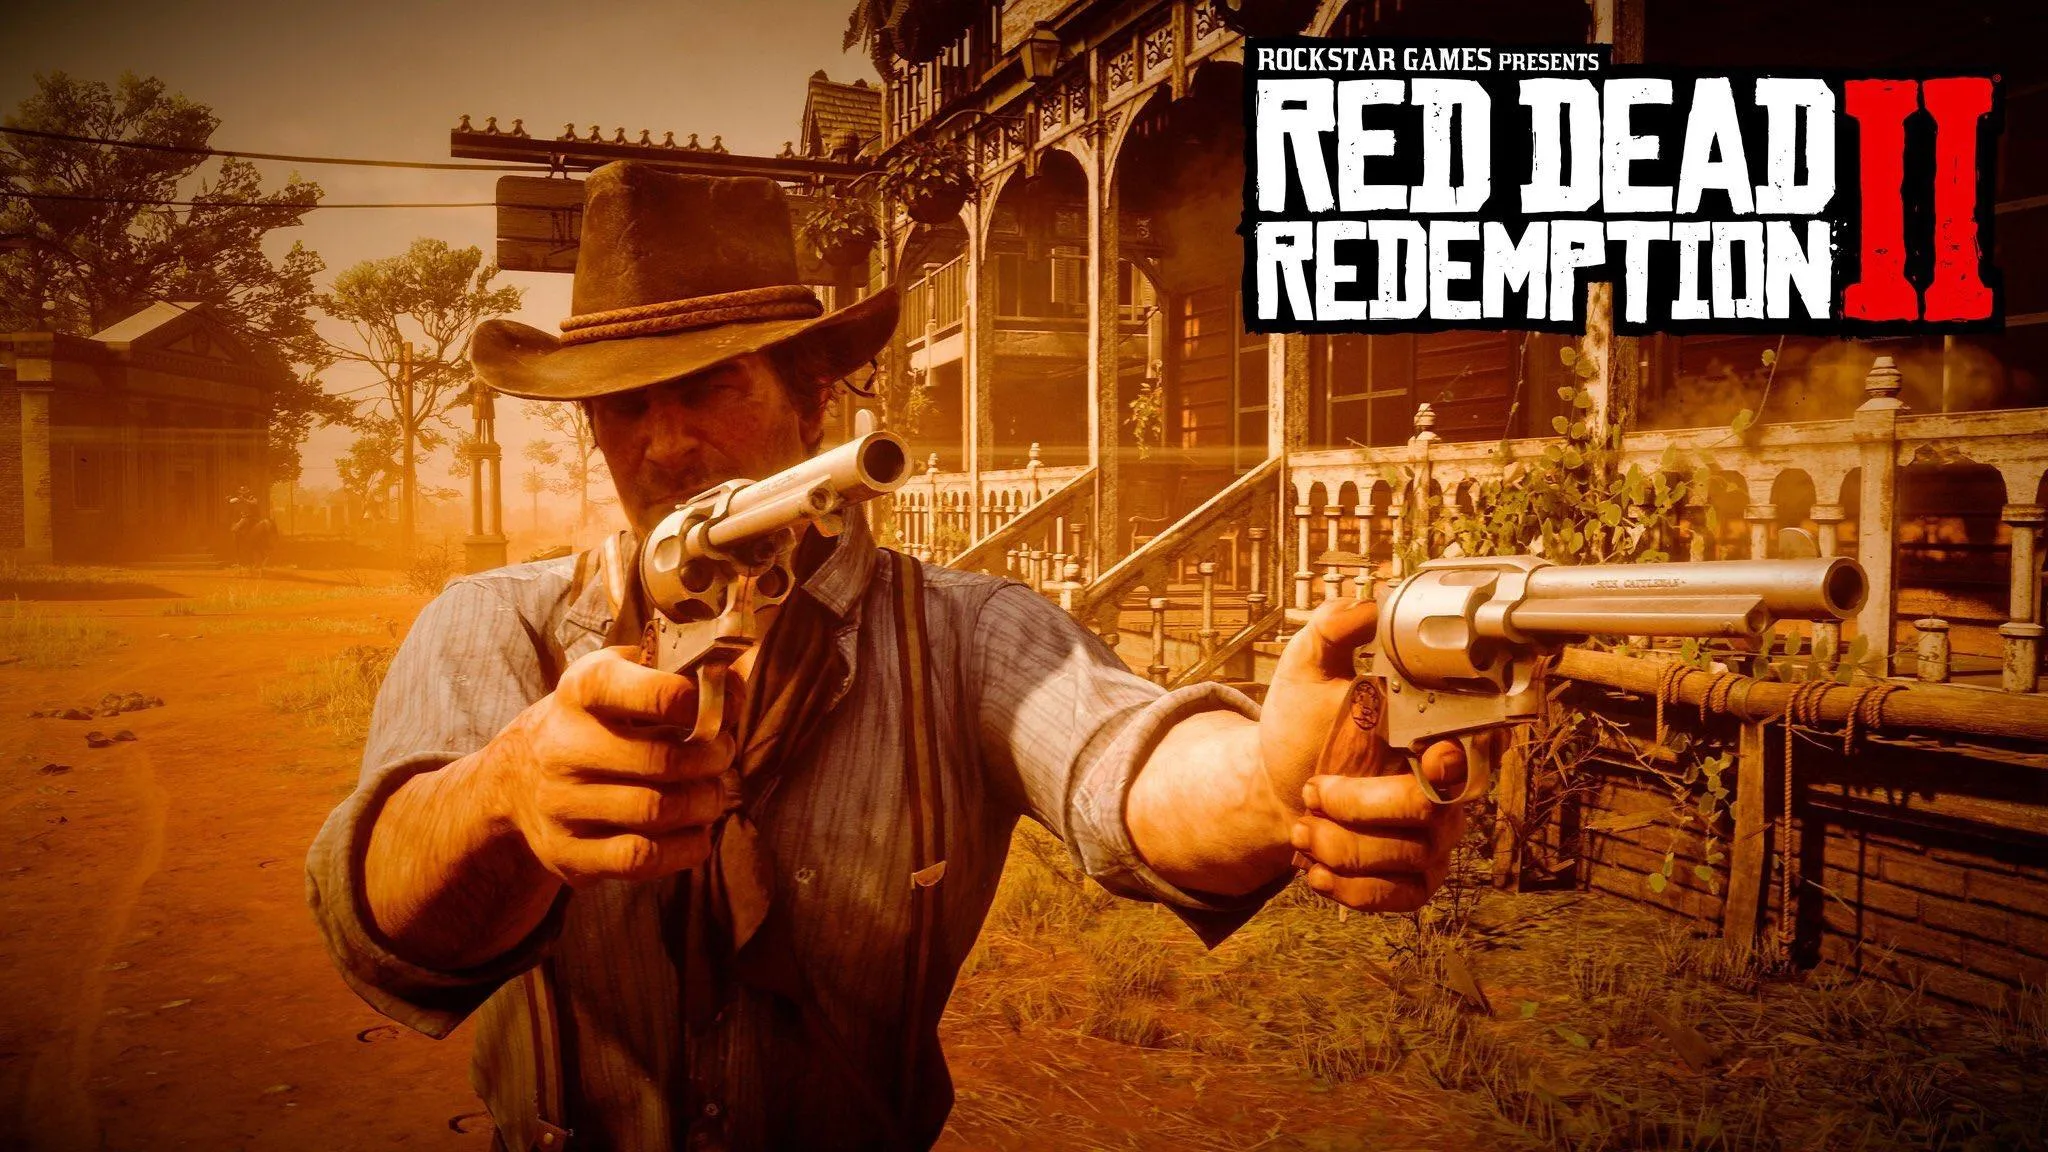 Here is the Red Dead Redemption 2 Gameplay Trailer Part 2!